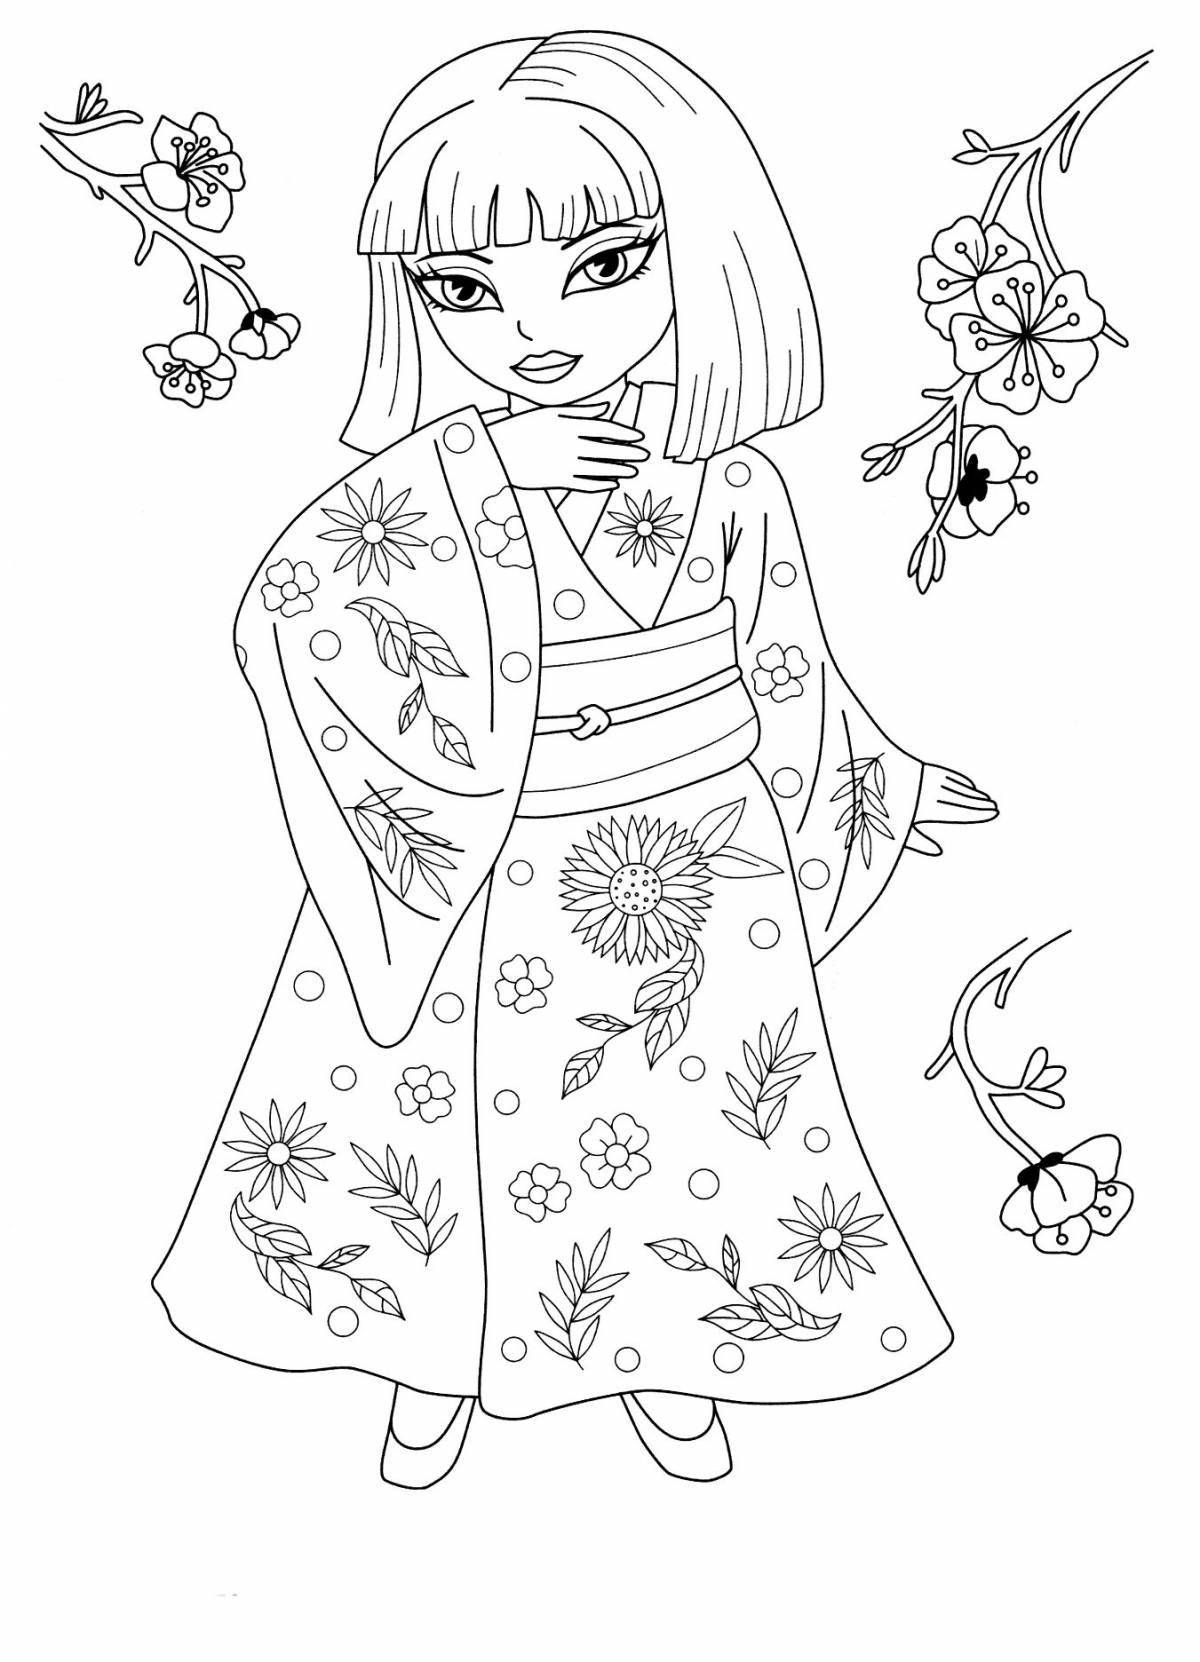 Bright Chinese girl coloring book